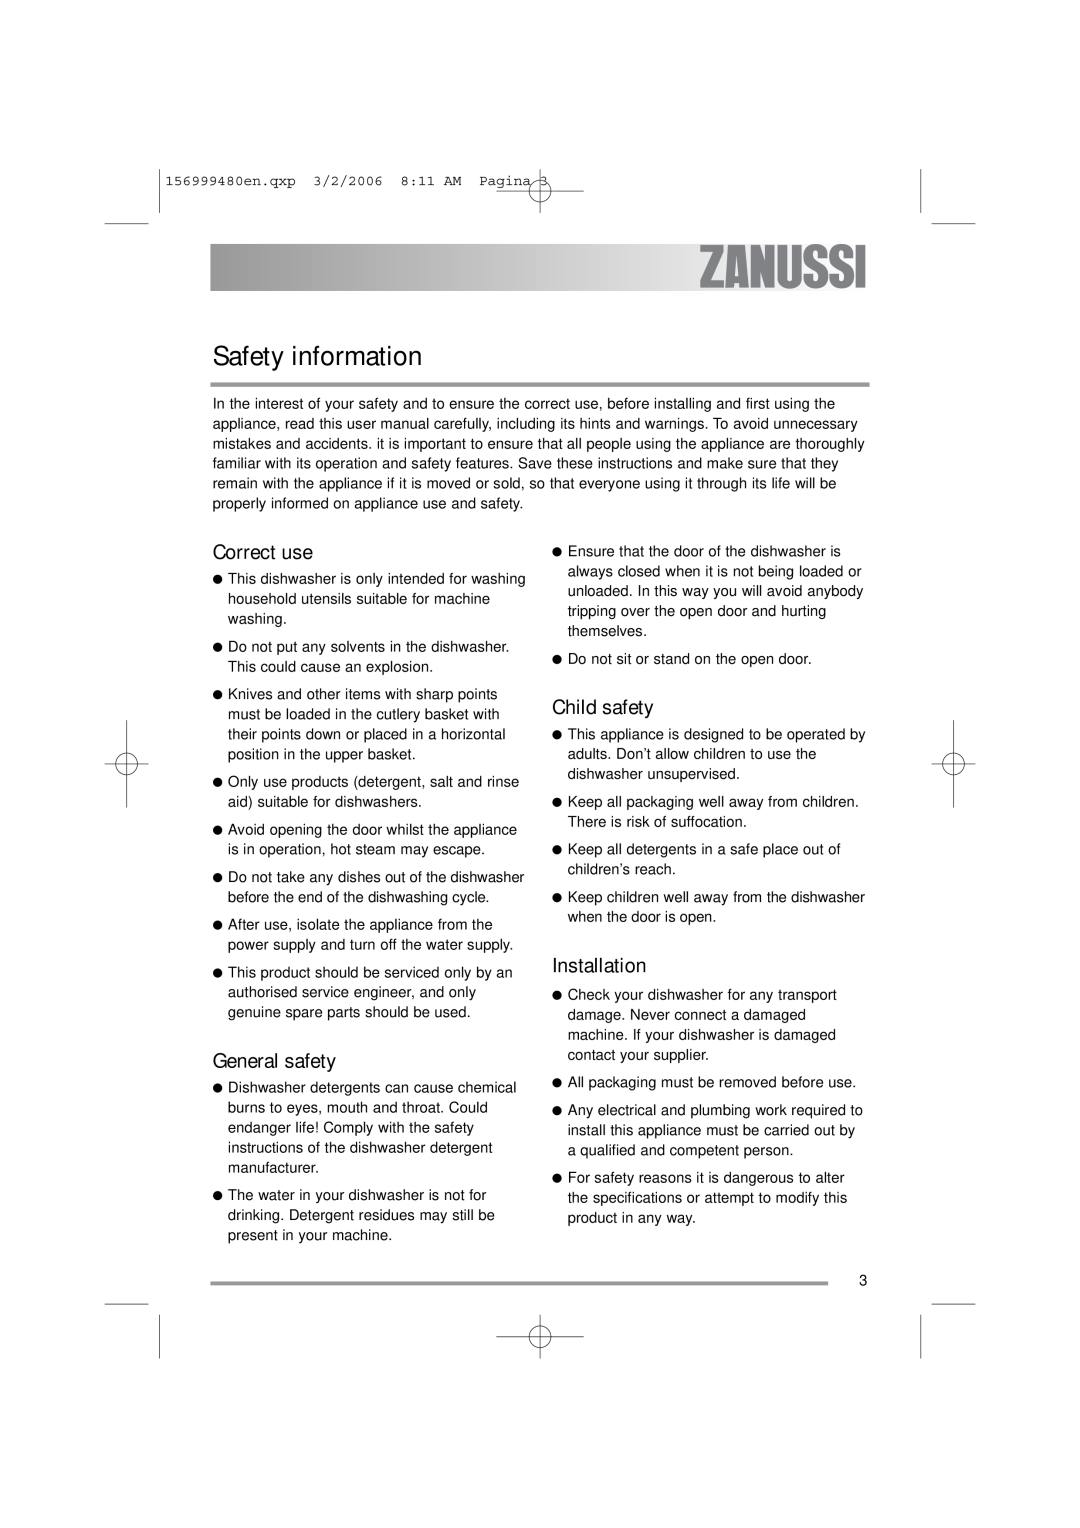 Zanussi ZDF311 user manual Safety information, Correct use, General safety, Child safety, Installation 